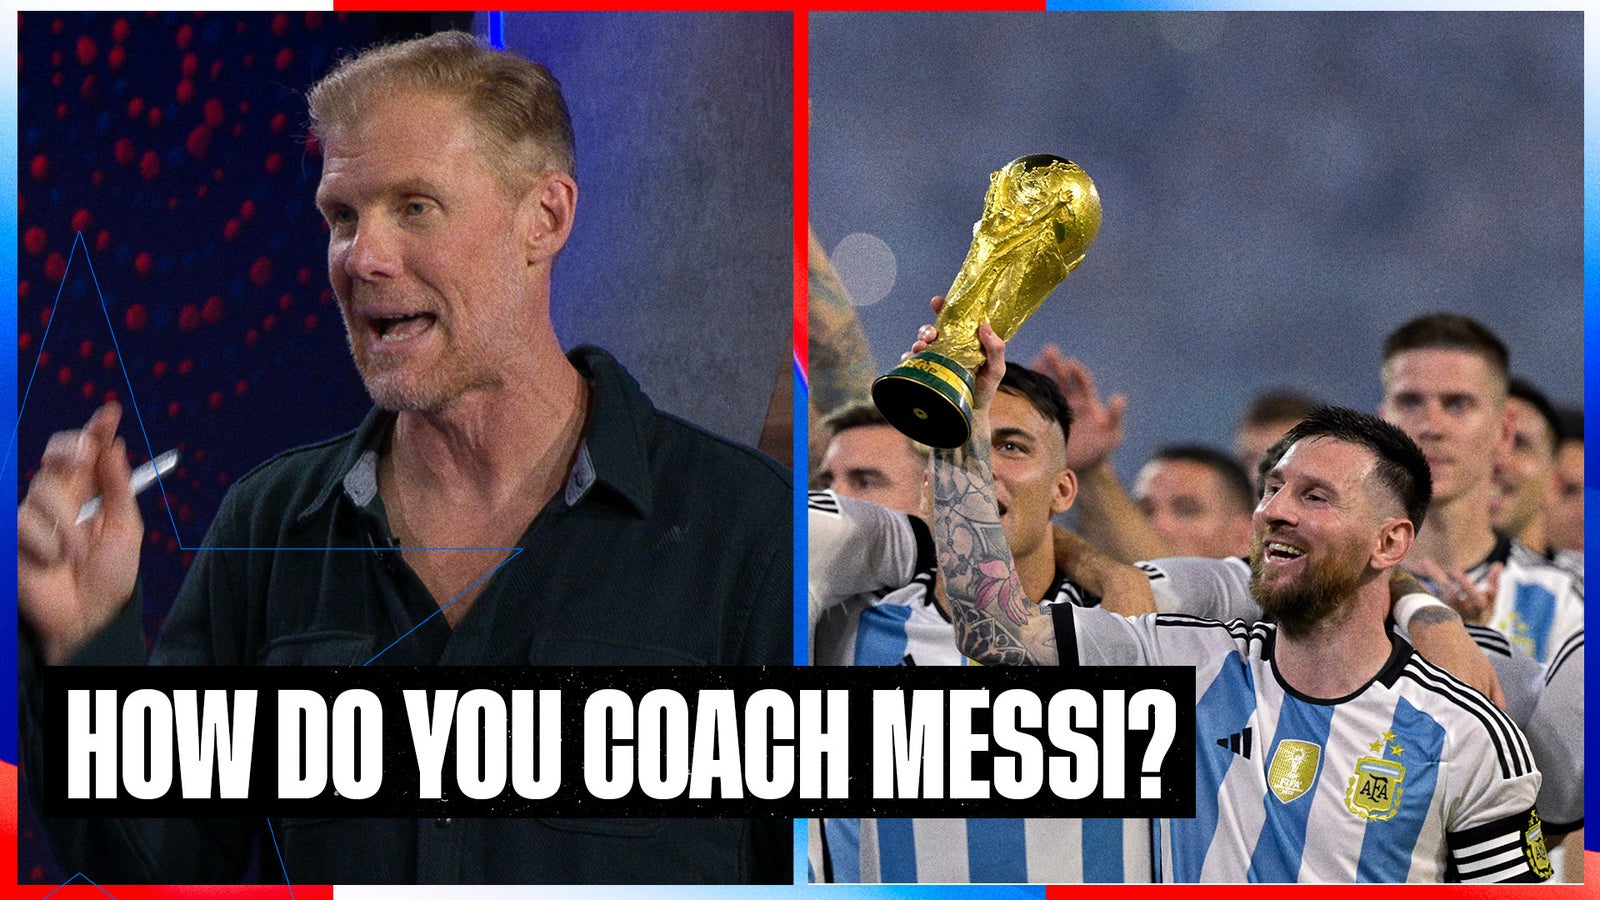 Messi's move to MLS: What is the best coaching tactic?  |  SOTU